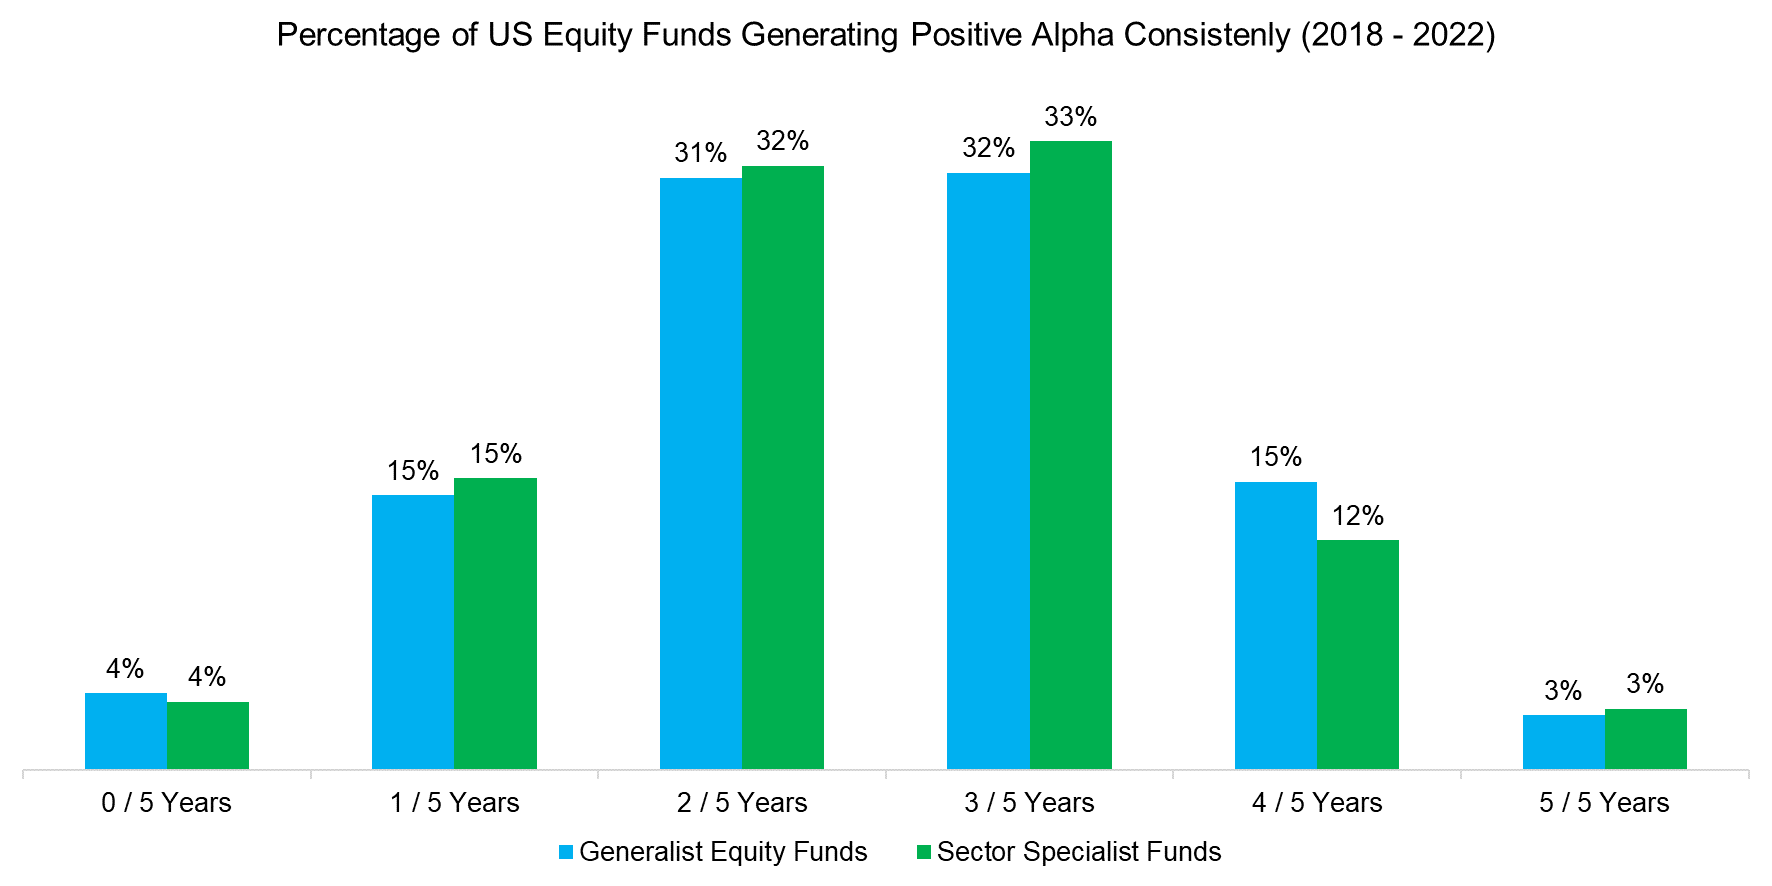 Percentage of US Equity Funds Generating Positive Alpha Consistenly (2018 - 2022)